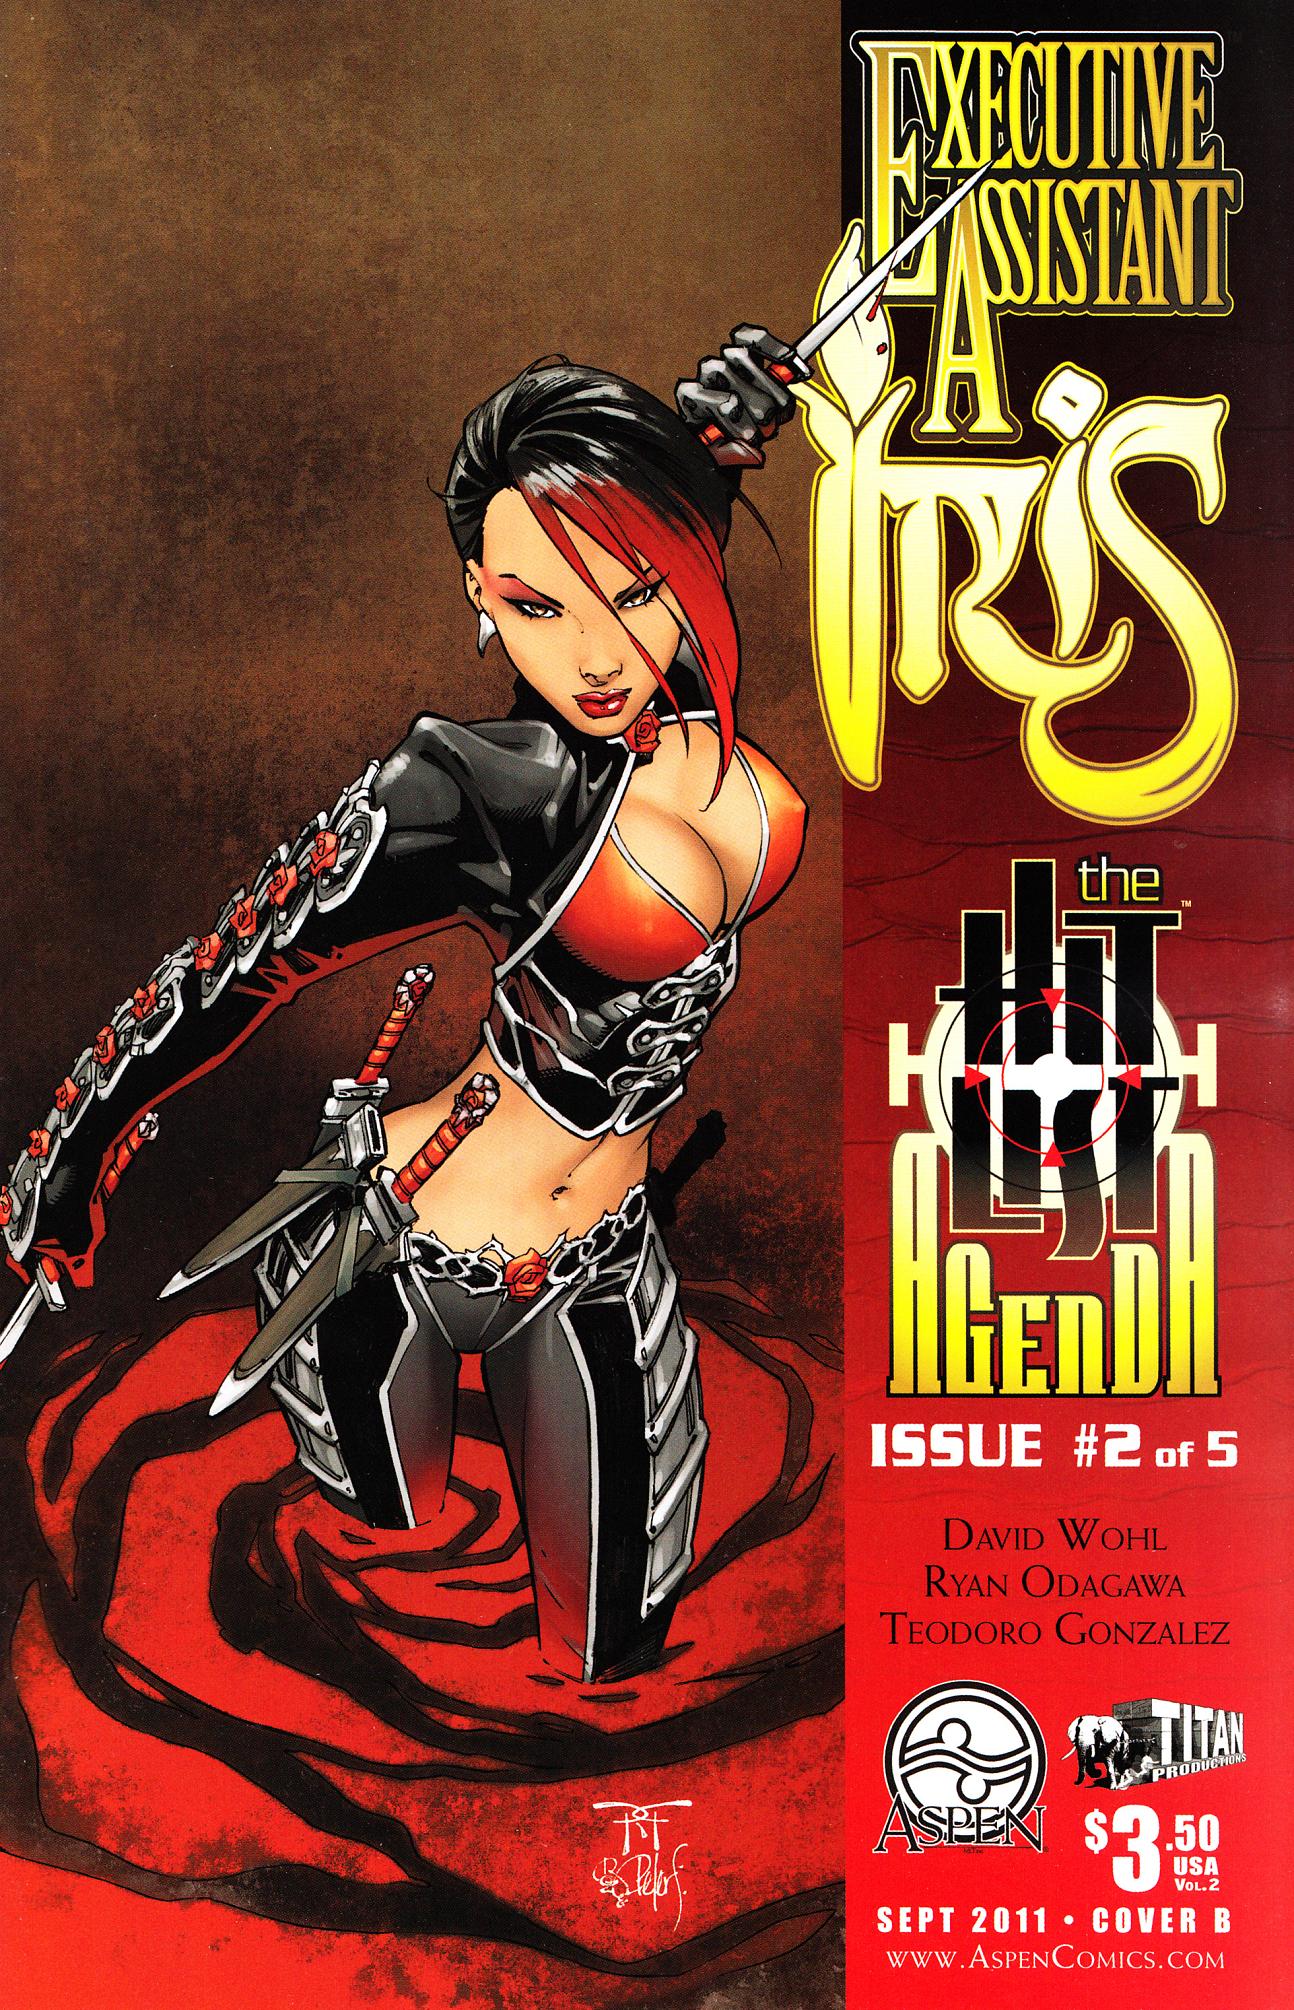 Read online Executive Assistant Iris (2011) comic -  Issue #2 - 2